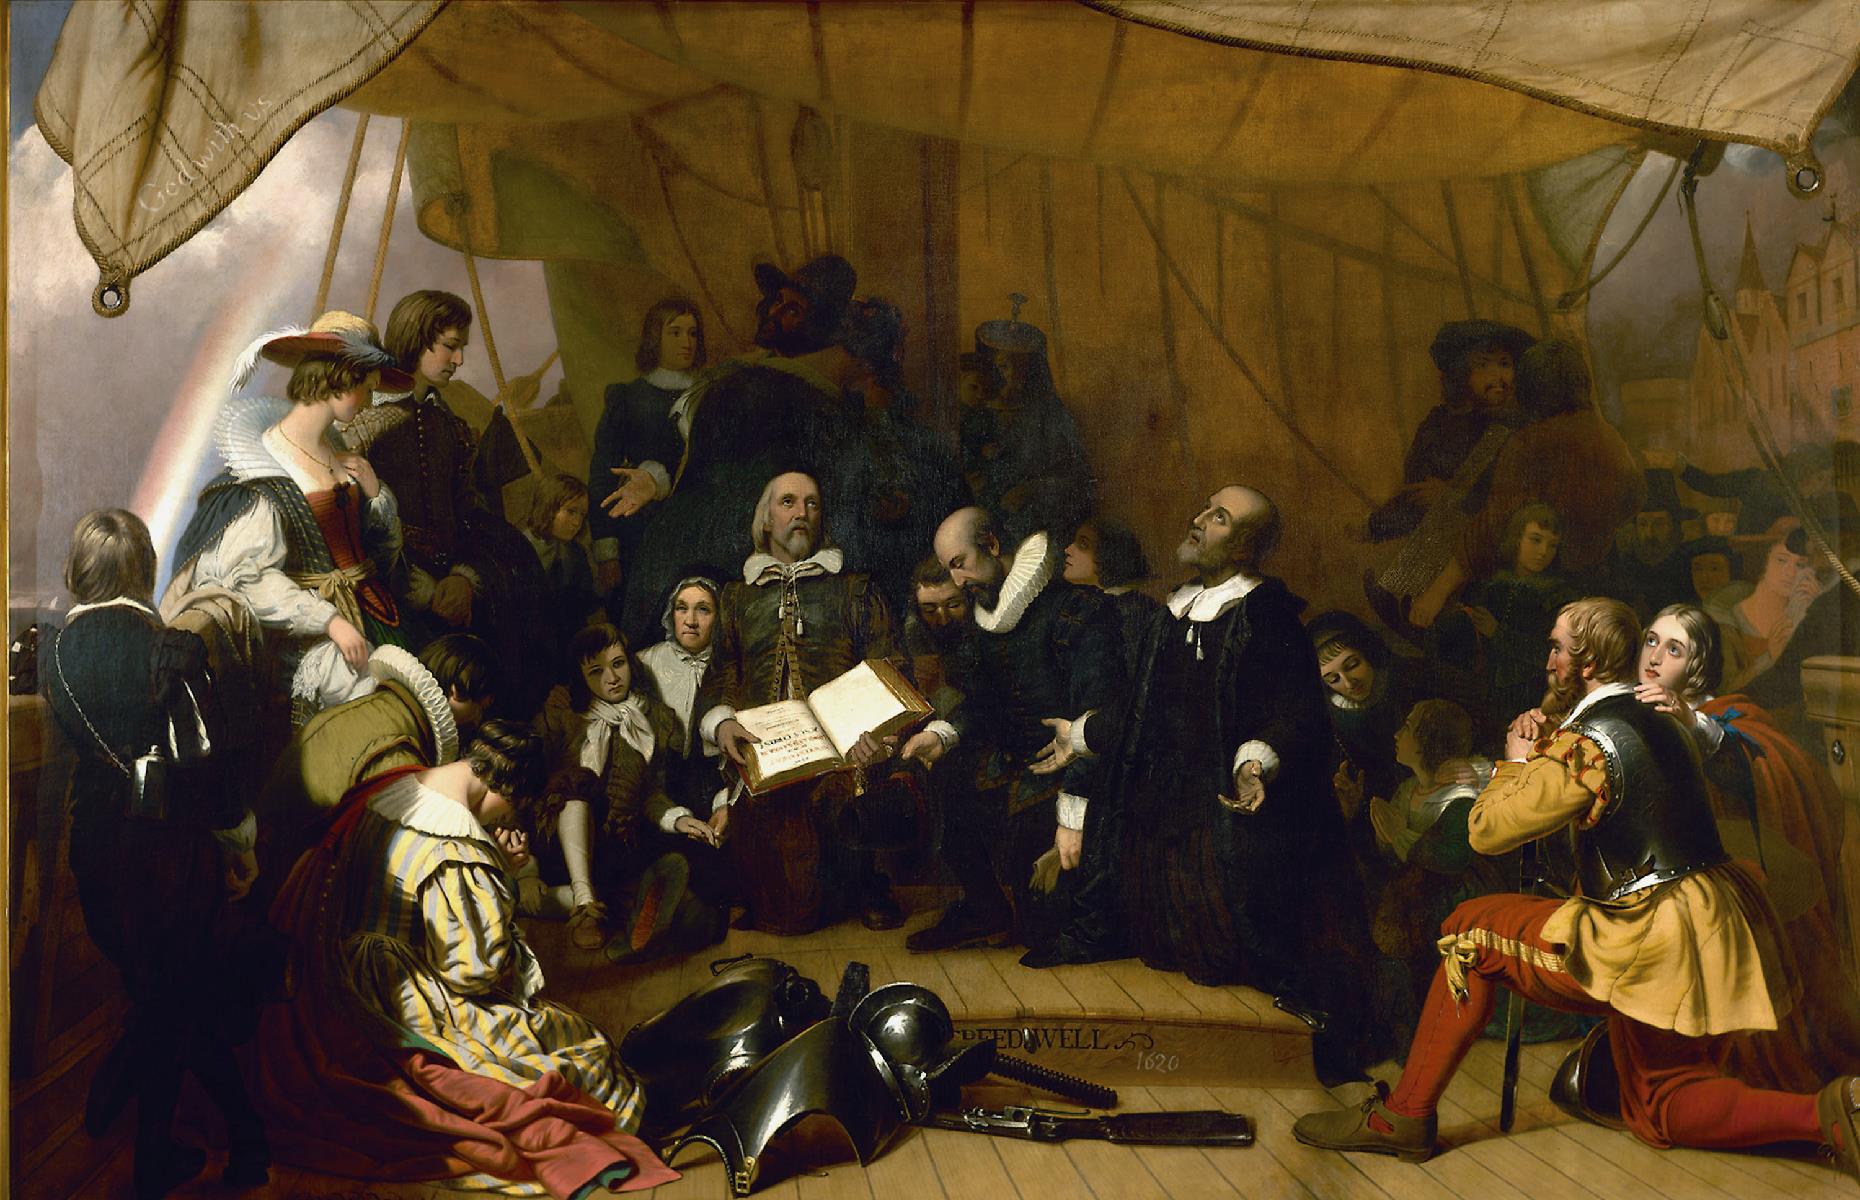 The story of the Mayflower begins back in the 17th century with the Pilgrims – or the Saints, as they were known then. This was a band of Protestant Separatists (many from Scrooby, Nottinghamshire, UK) who were disillusioned with the state of the Church of England at this time. This stalwart religious group wished to disentangle themselves from the institution’s supposed corruption and begin their own, novel church elsewhere. And so, their journey began.